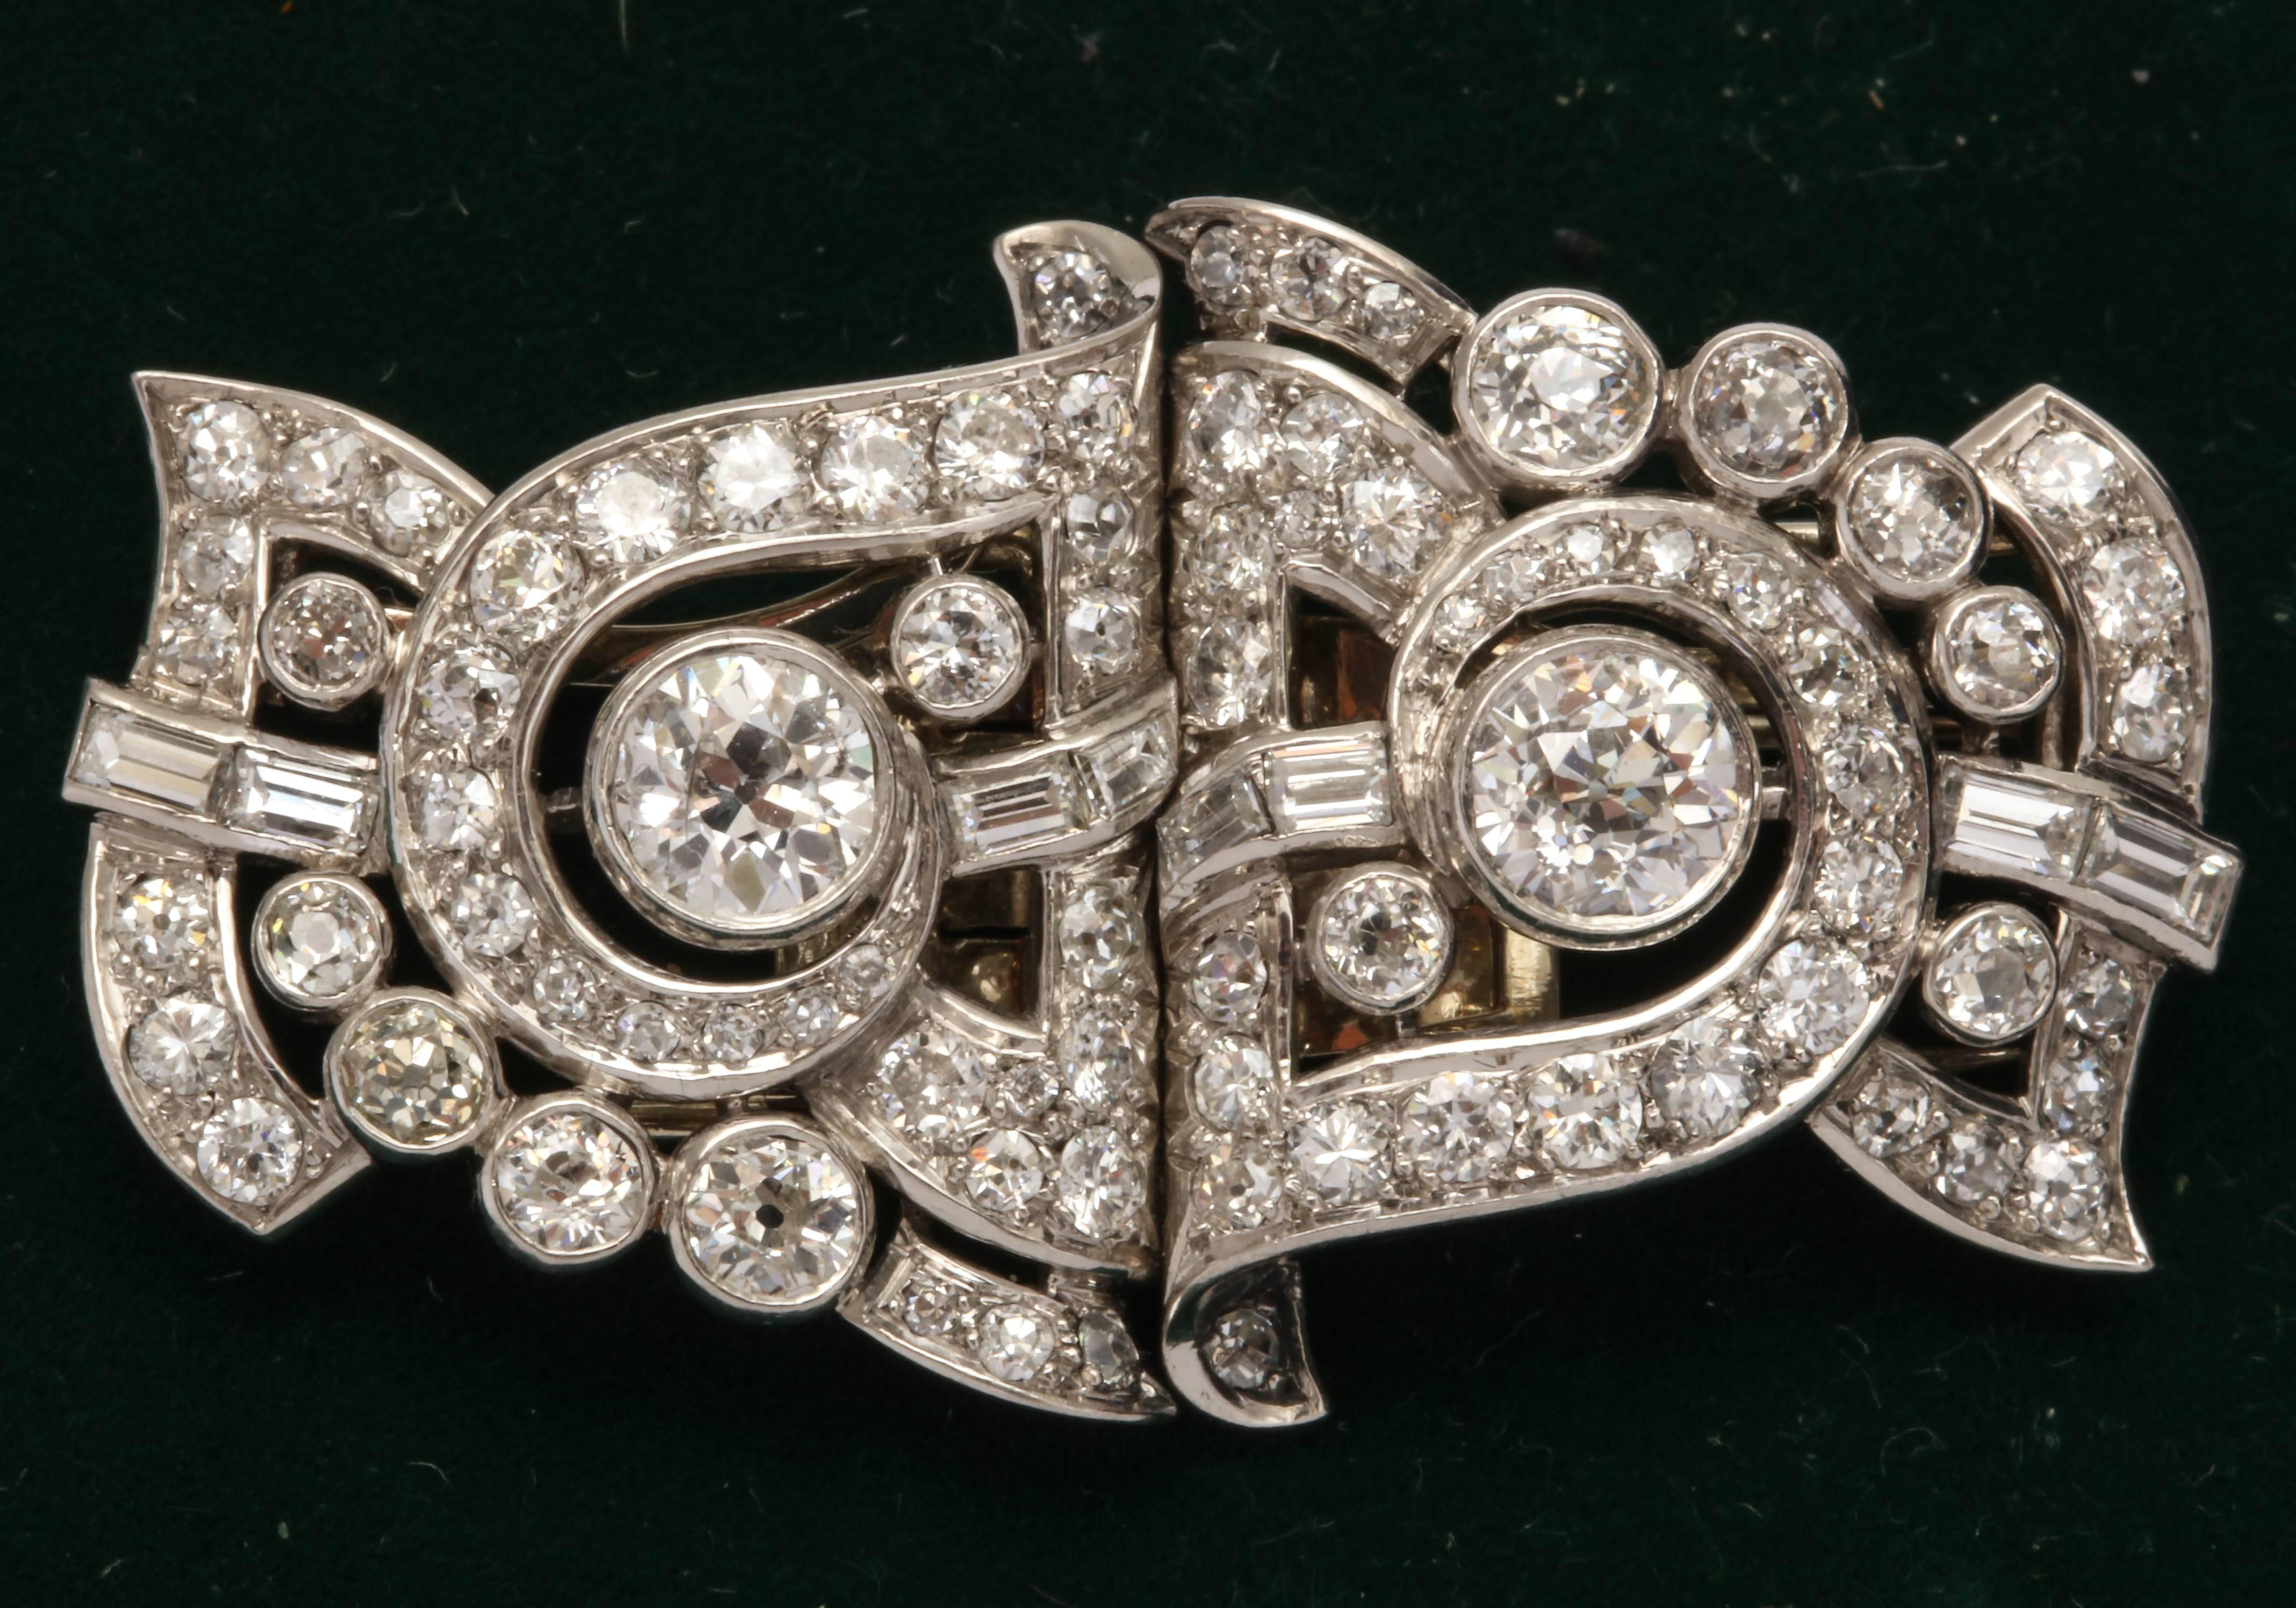 One Pair Of Platinum And Diamond Ladies Clips And Brooch Combination Pins Embellished with Numerous Full Cut Round Diamonds And Further embellished With Eight Custom Cut Fancy Baguette Cut Diamonds Total Diamond weight Approximately 4 Carats. Center